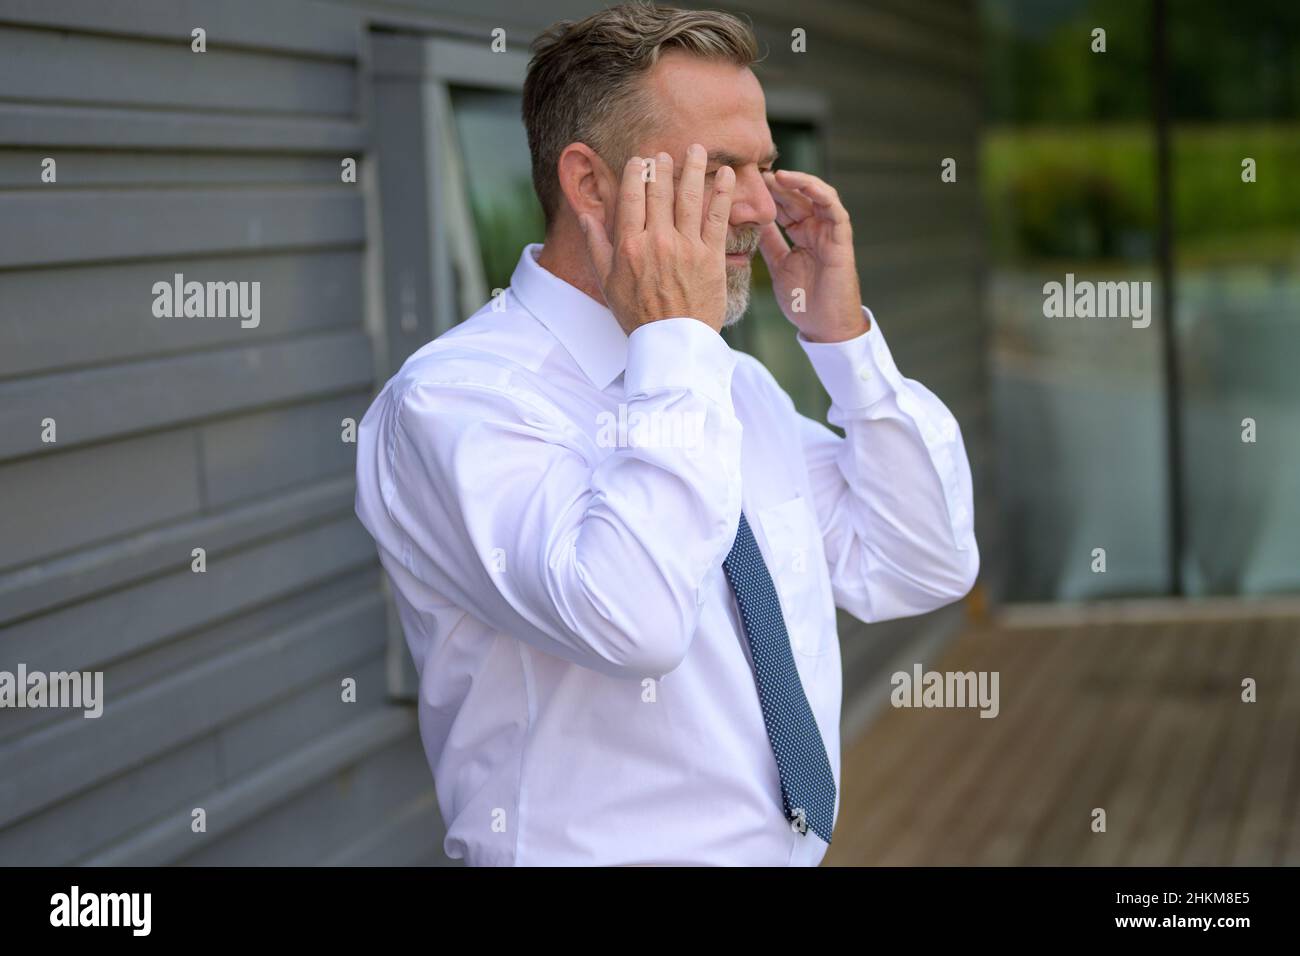 Distressed or anxious senior man raising his hands to the sides of his head as he stands on an undercover urban walkway Stock Photo